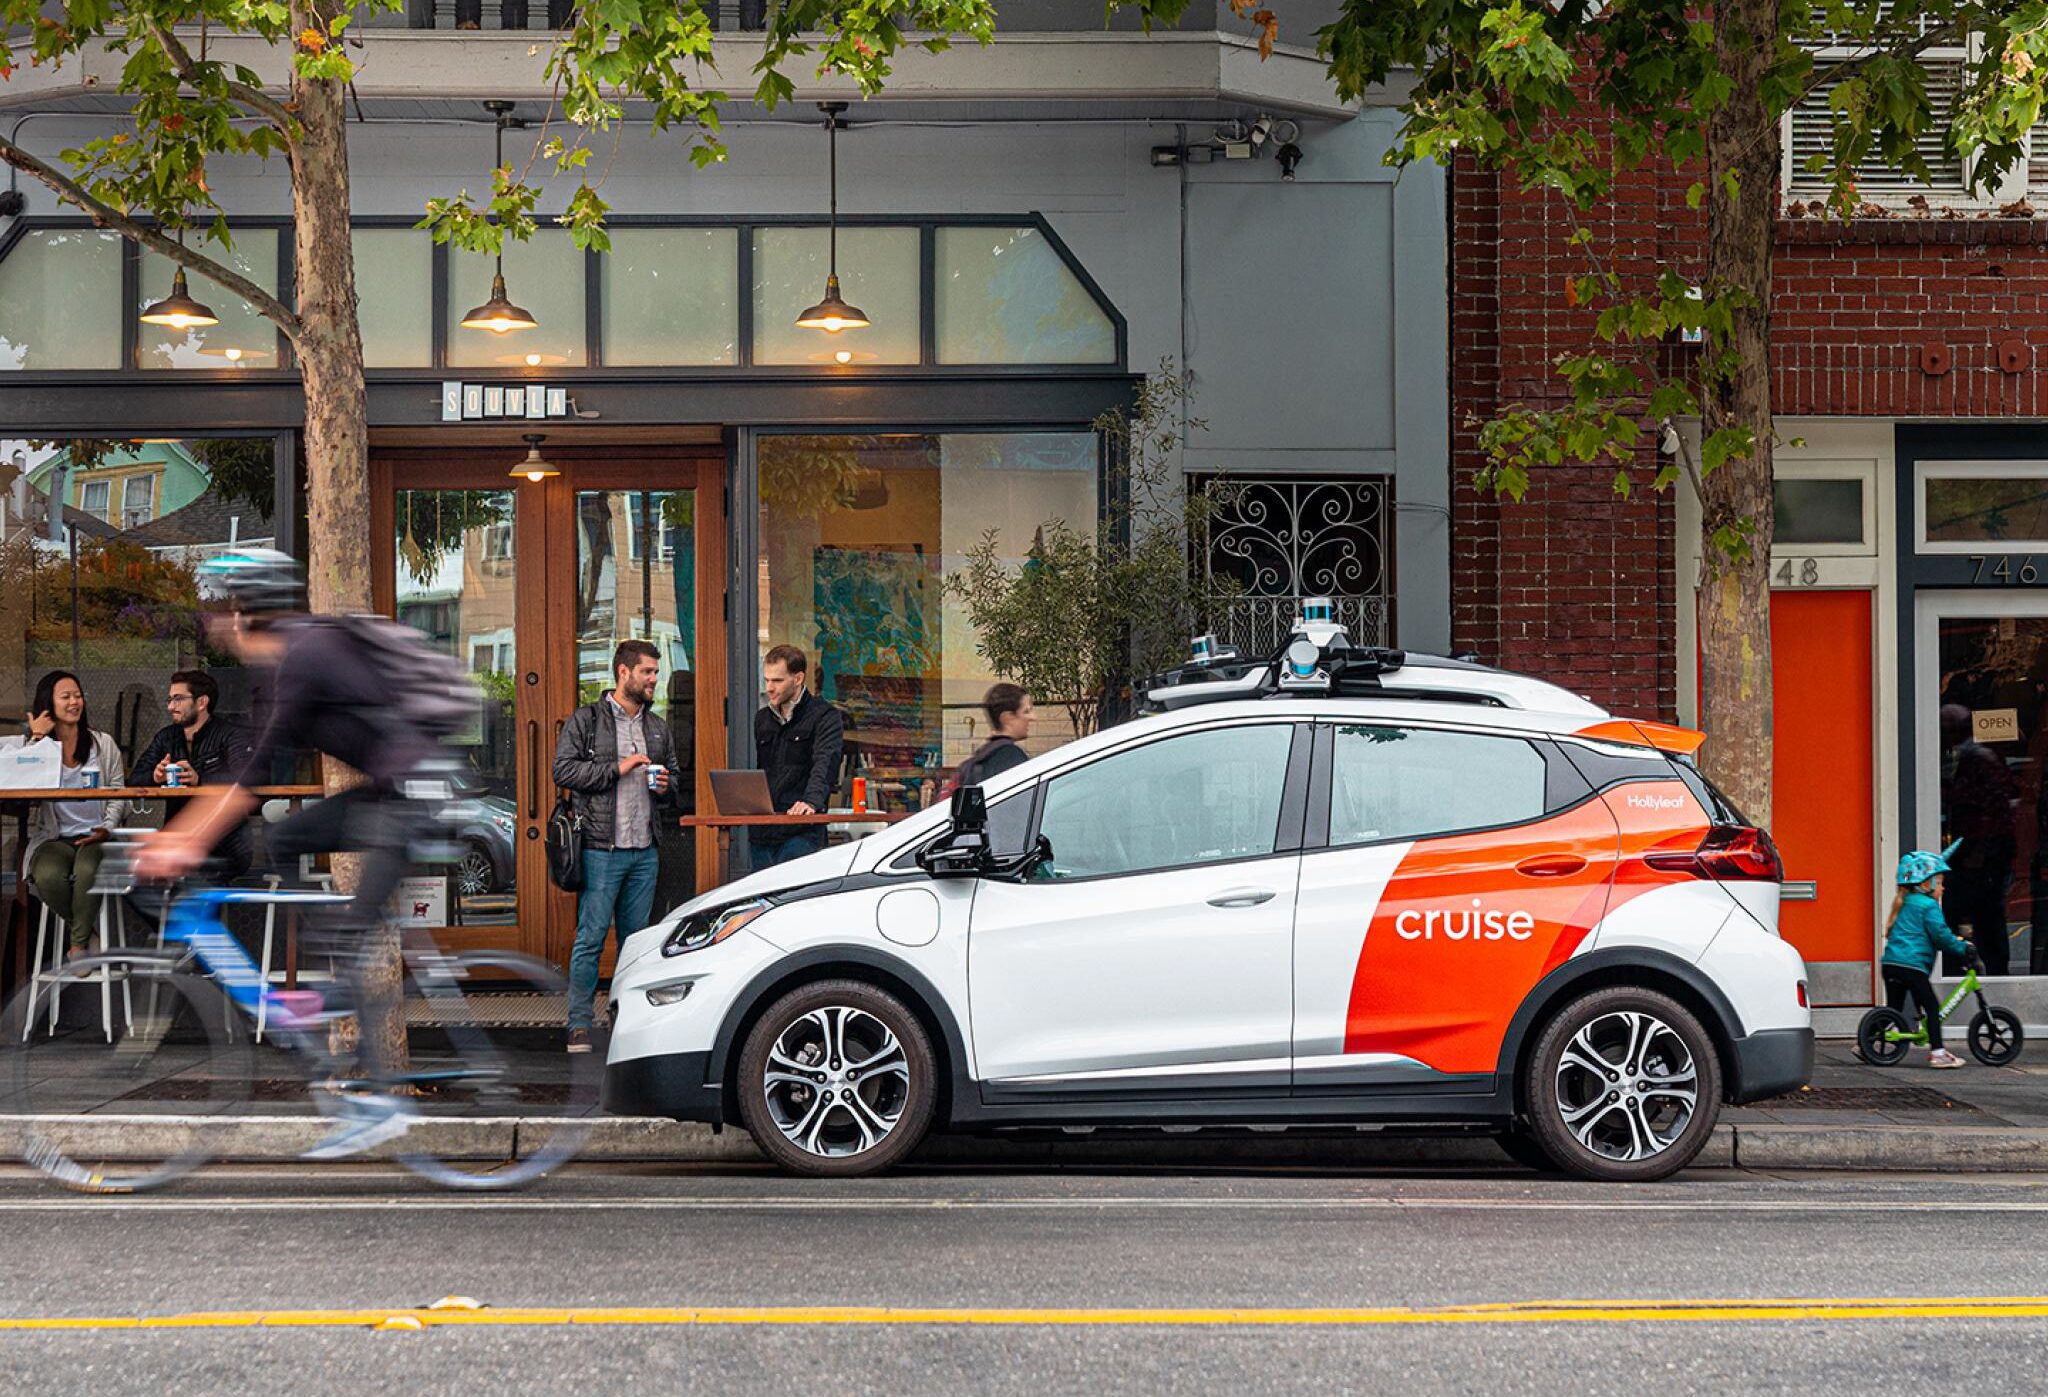 theepochtimes.com - Bryan Jung - Driverless Cars Are Causing Havoc in San Francisco, Residents Say